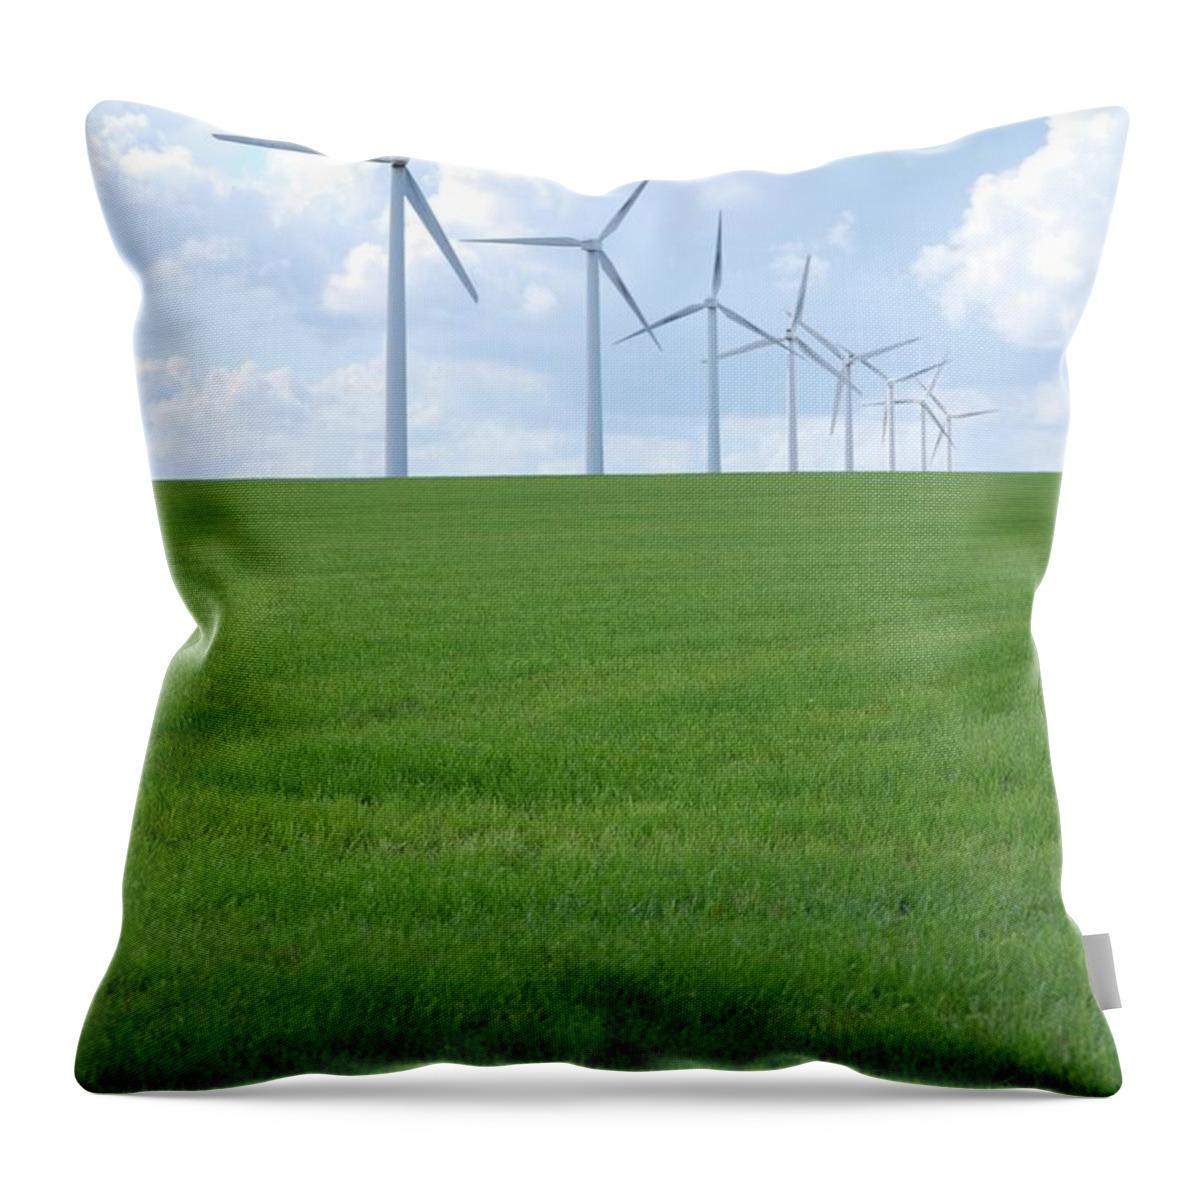 Environmental Conservation Throw Pillow featuring the photograph Wind Power by Photo By Svend Erik Hansen